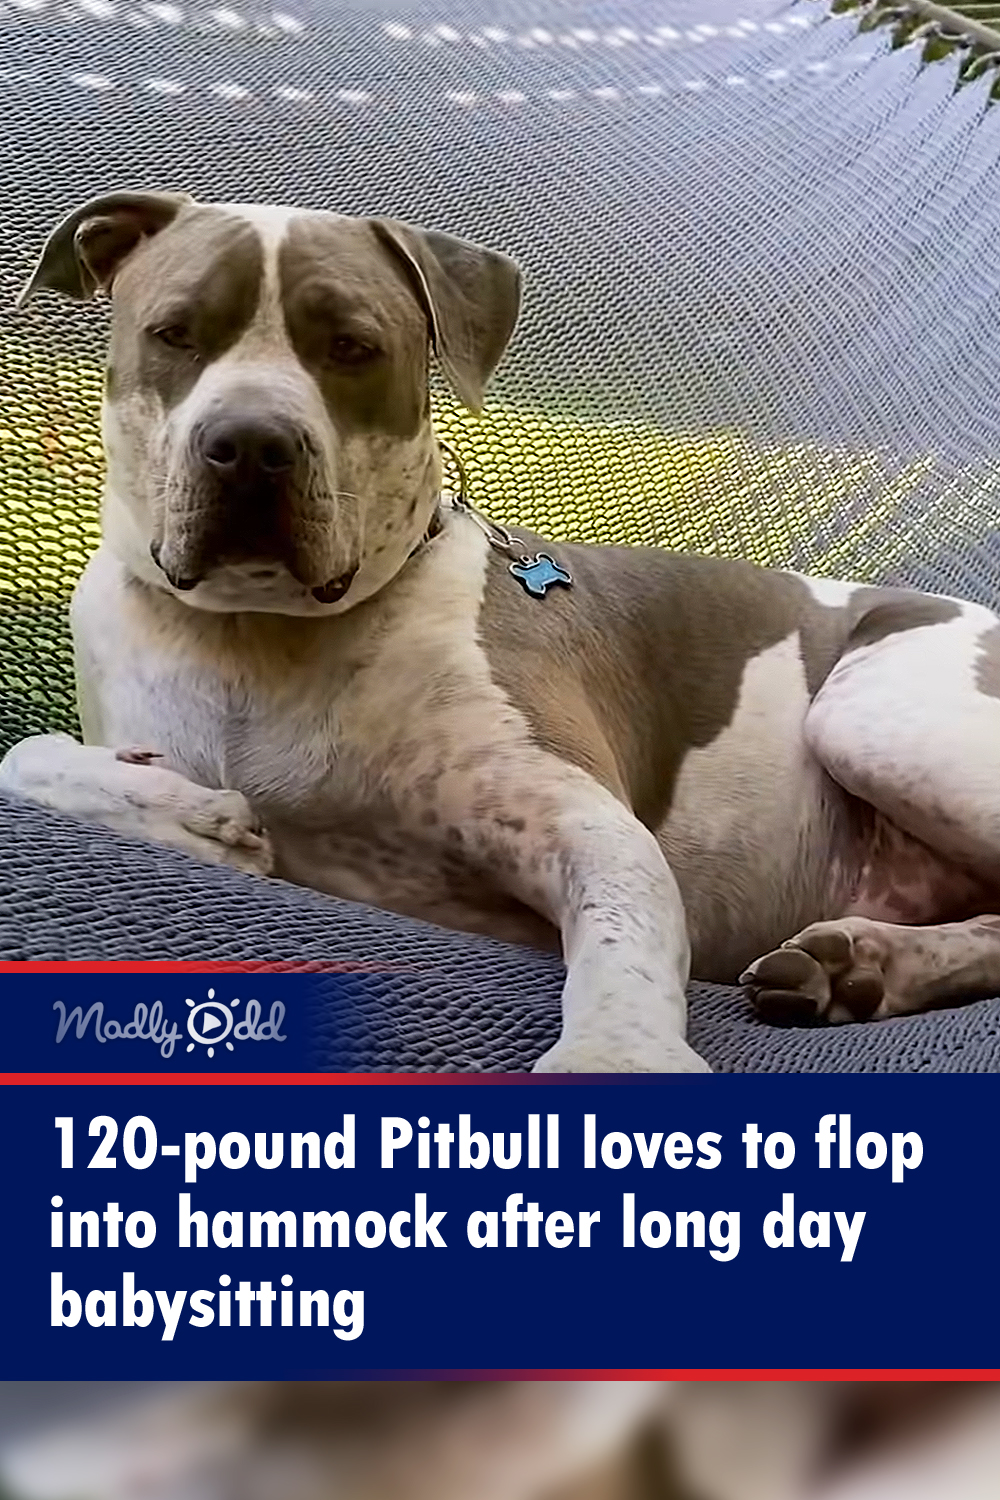 120-pound Pitbull loves to flop into hammock after long day babysitting